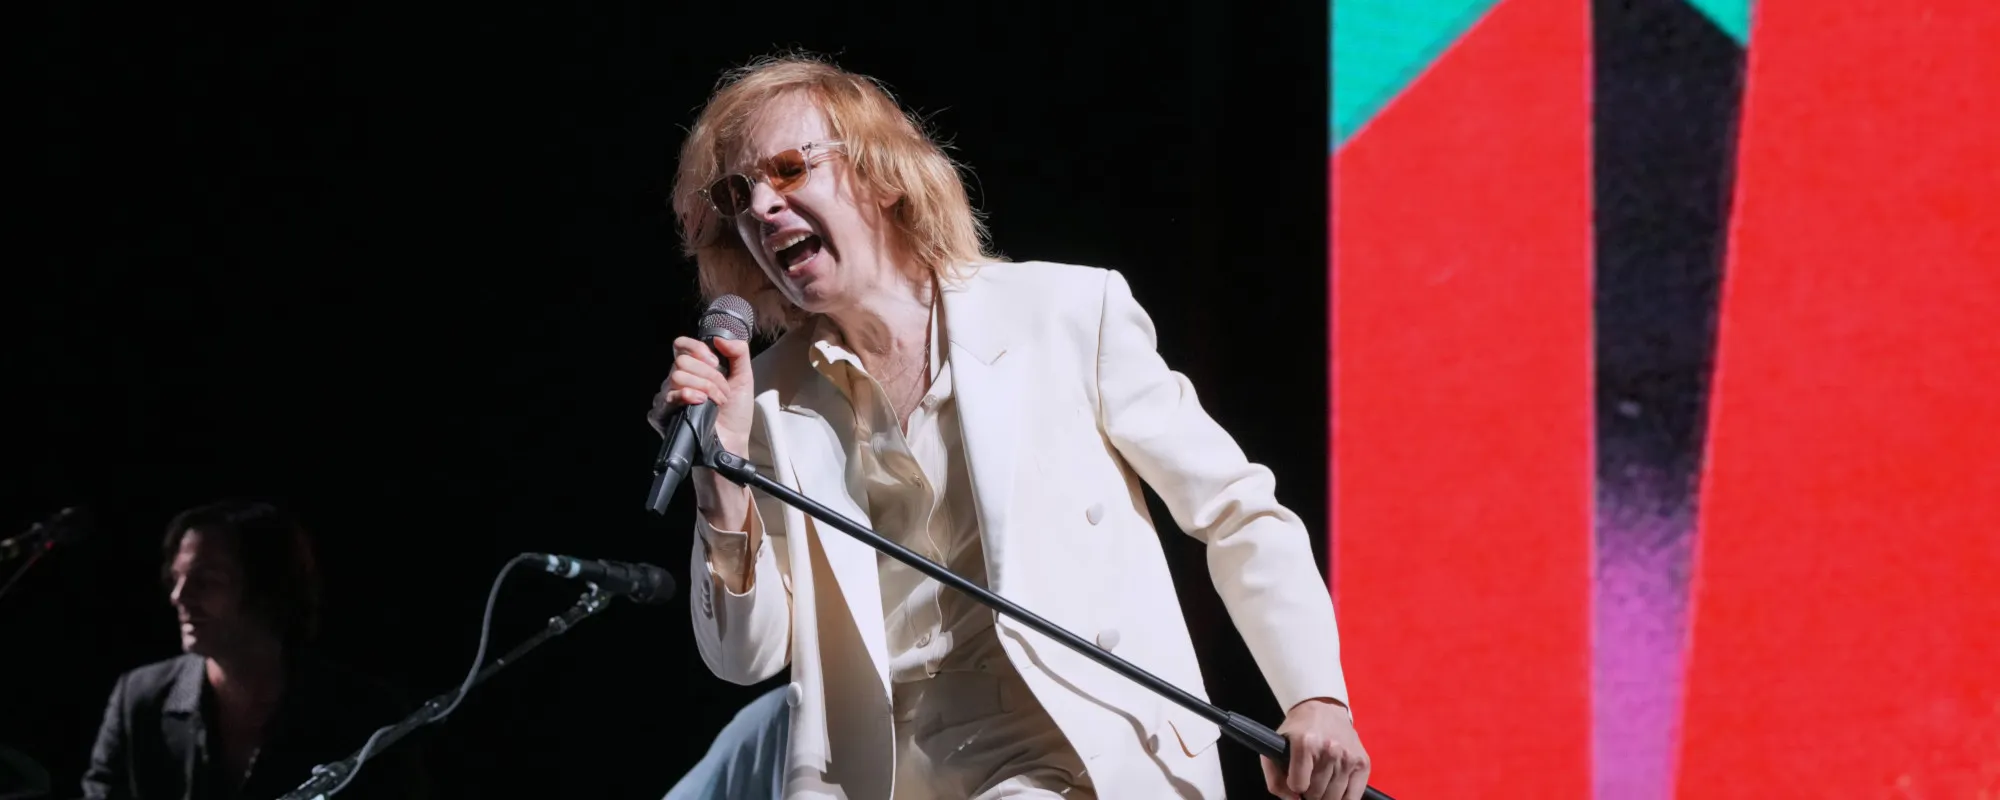 Beck Bows Out as Opener in Arcade Fire Tour